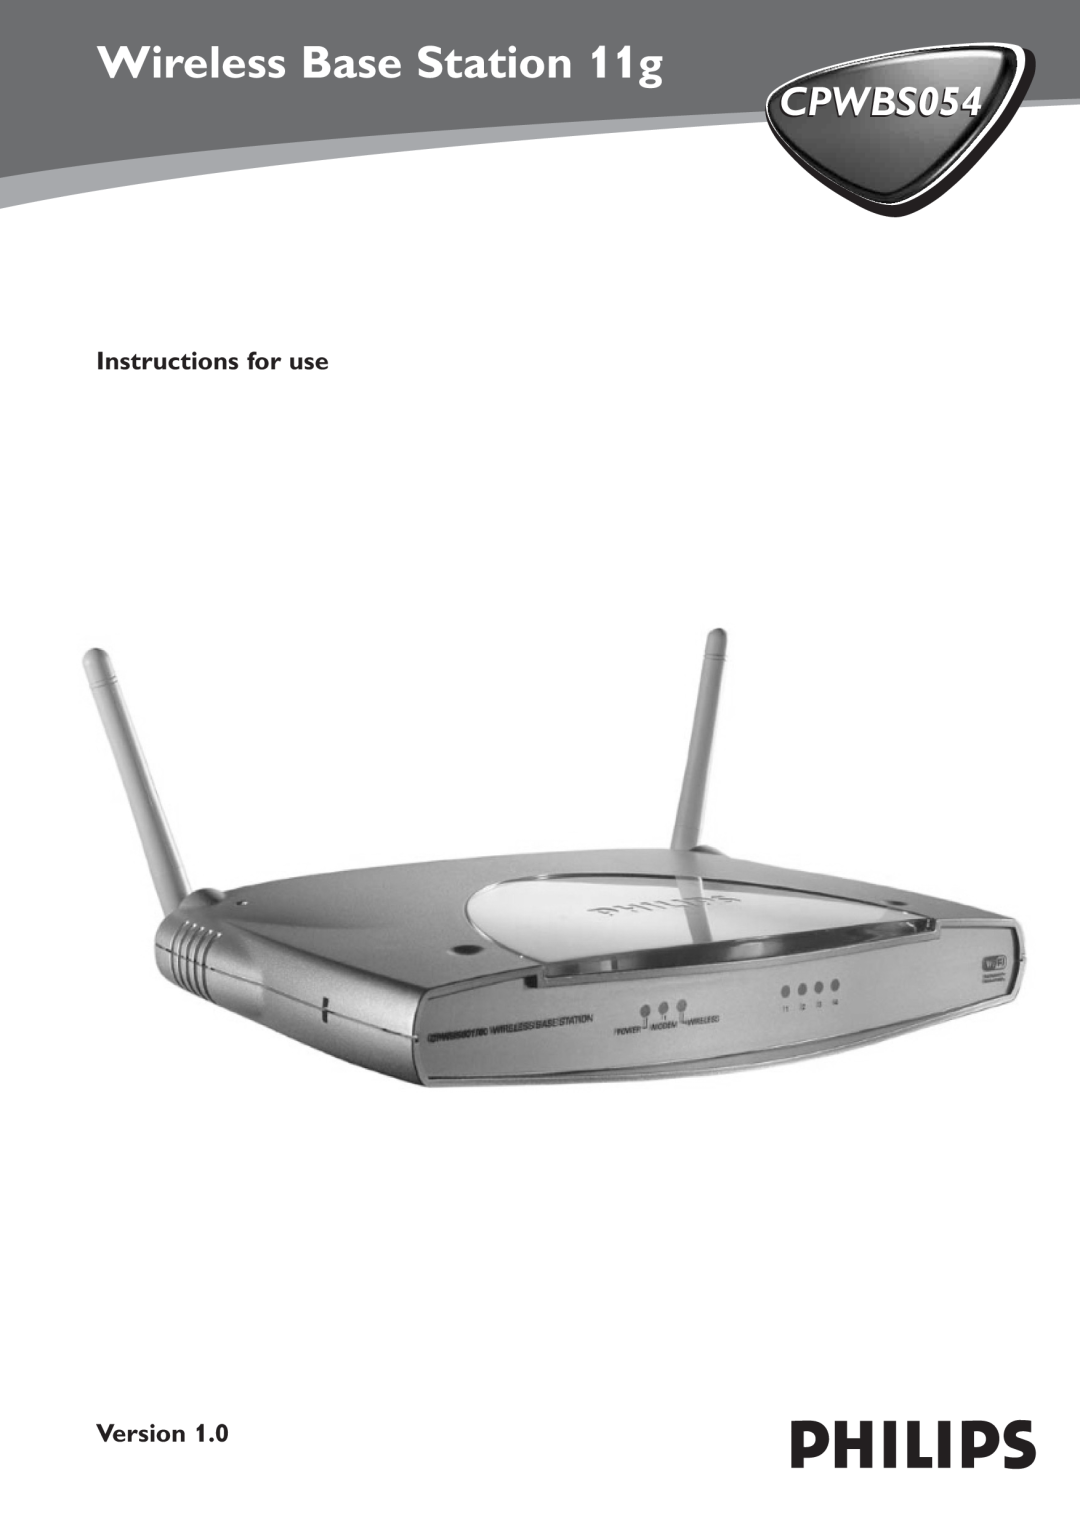 Philips CPWBS054CPWBS054 manual Instructions for use Version, Wireless Base Station 11g 